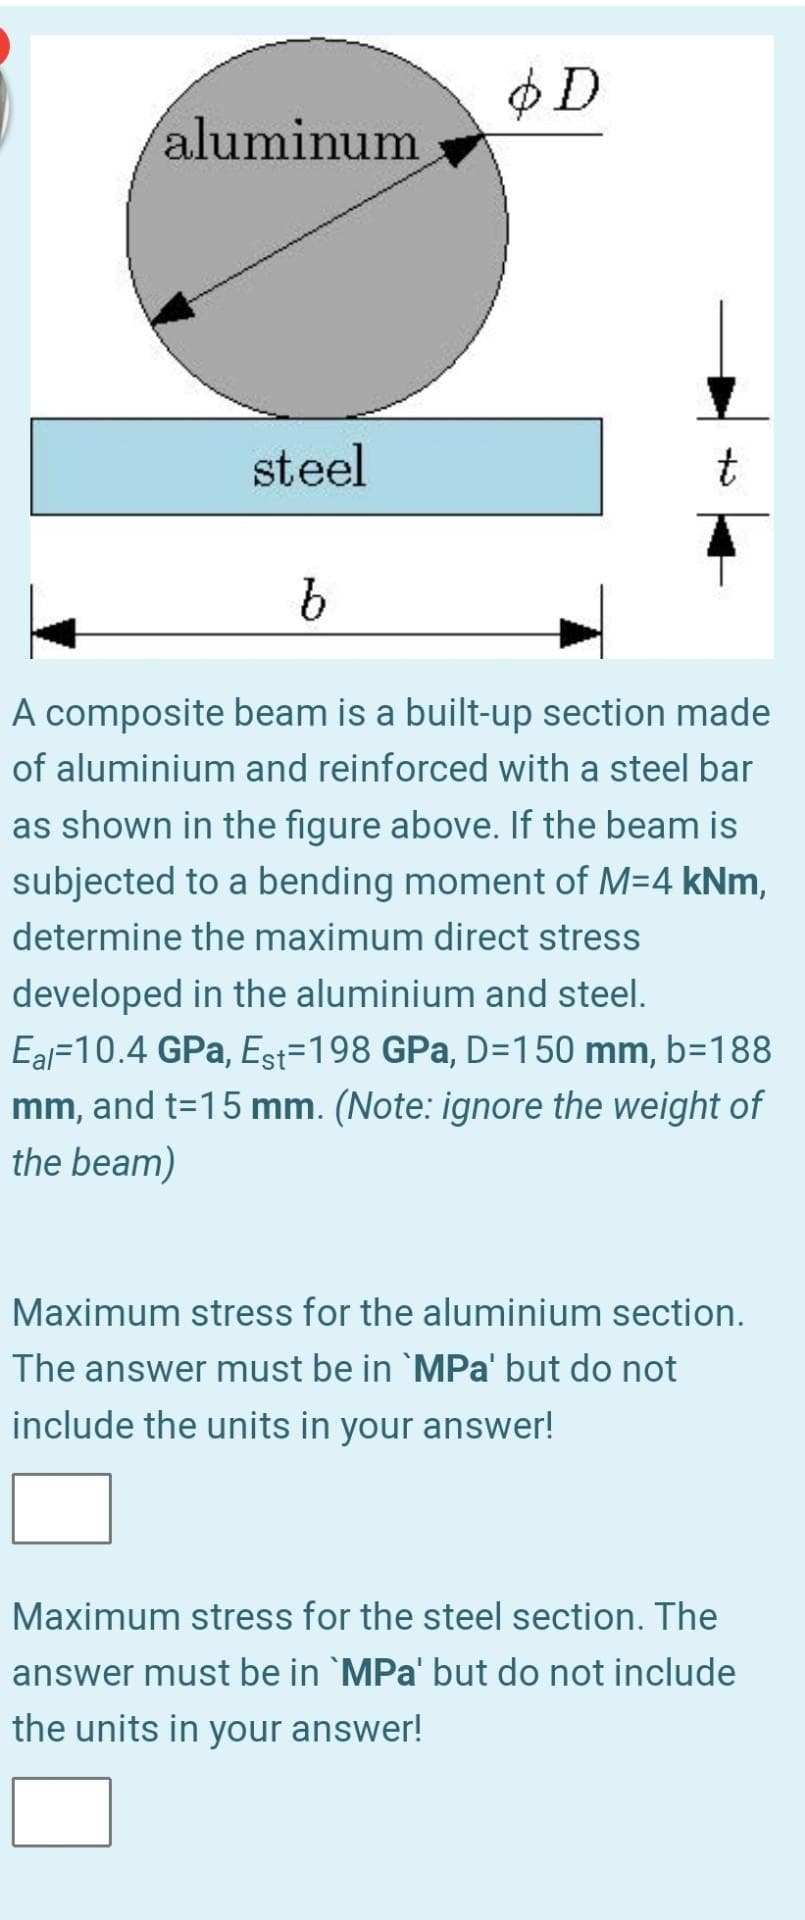 $D
aluminum
steel
t
A composite beam is a built-up section made
of aluminium and reinforced with a steel bar
as shown in the figure above. If the beam is
subjected to a bending moment of M=4 kNm,
determine the maximum direct stress
developed in the aluminium and steel.
Eal=10.4 GPa, Est=198 GPa, D=150 mm, b=188
mm, and t=15 mm. (Note: ignore the weight of
the beam)
Maximum stress for the aluminium section.
The answer must be in `MPa' but do not
include the units in your answer!
Maximum stress for the steel section. The
answer must be in `MPa' but do not include
the units in your answer!
